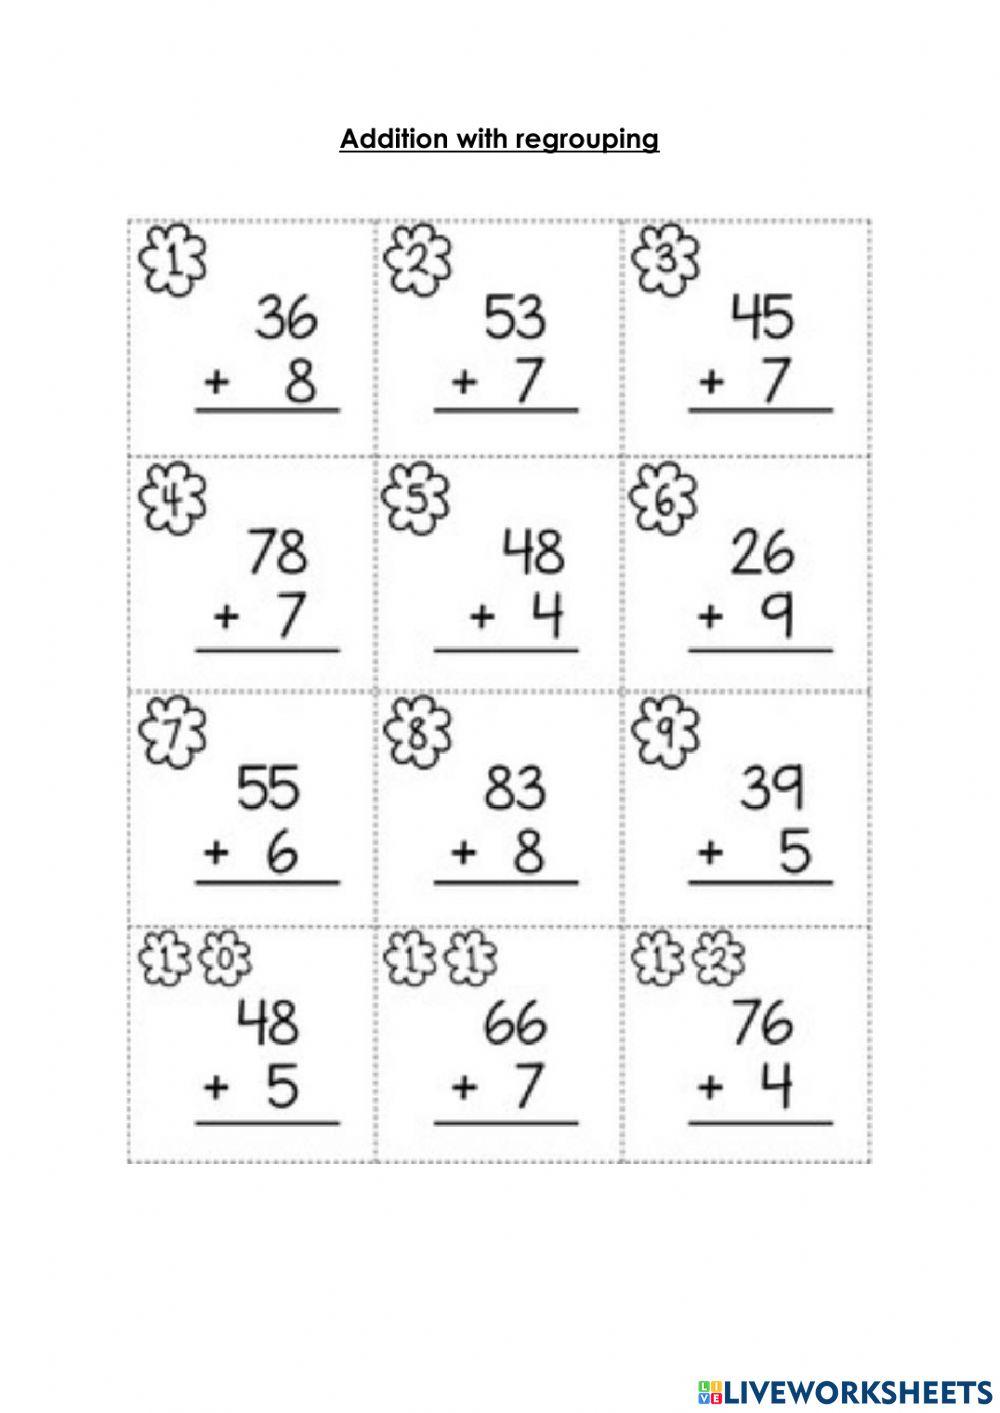 Addition with regrouping worksheet